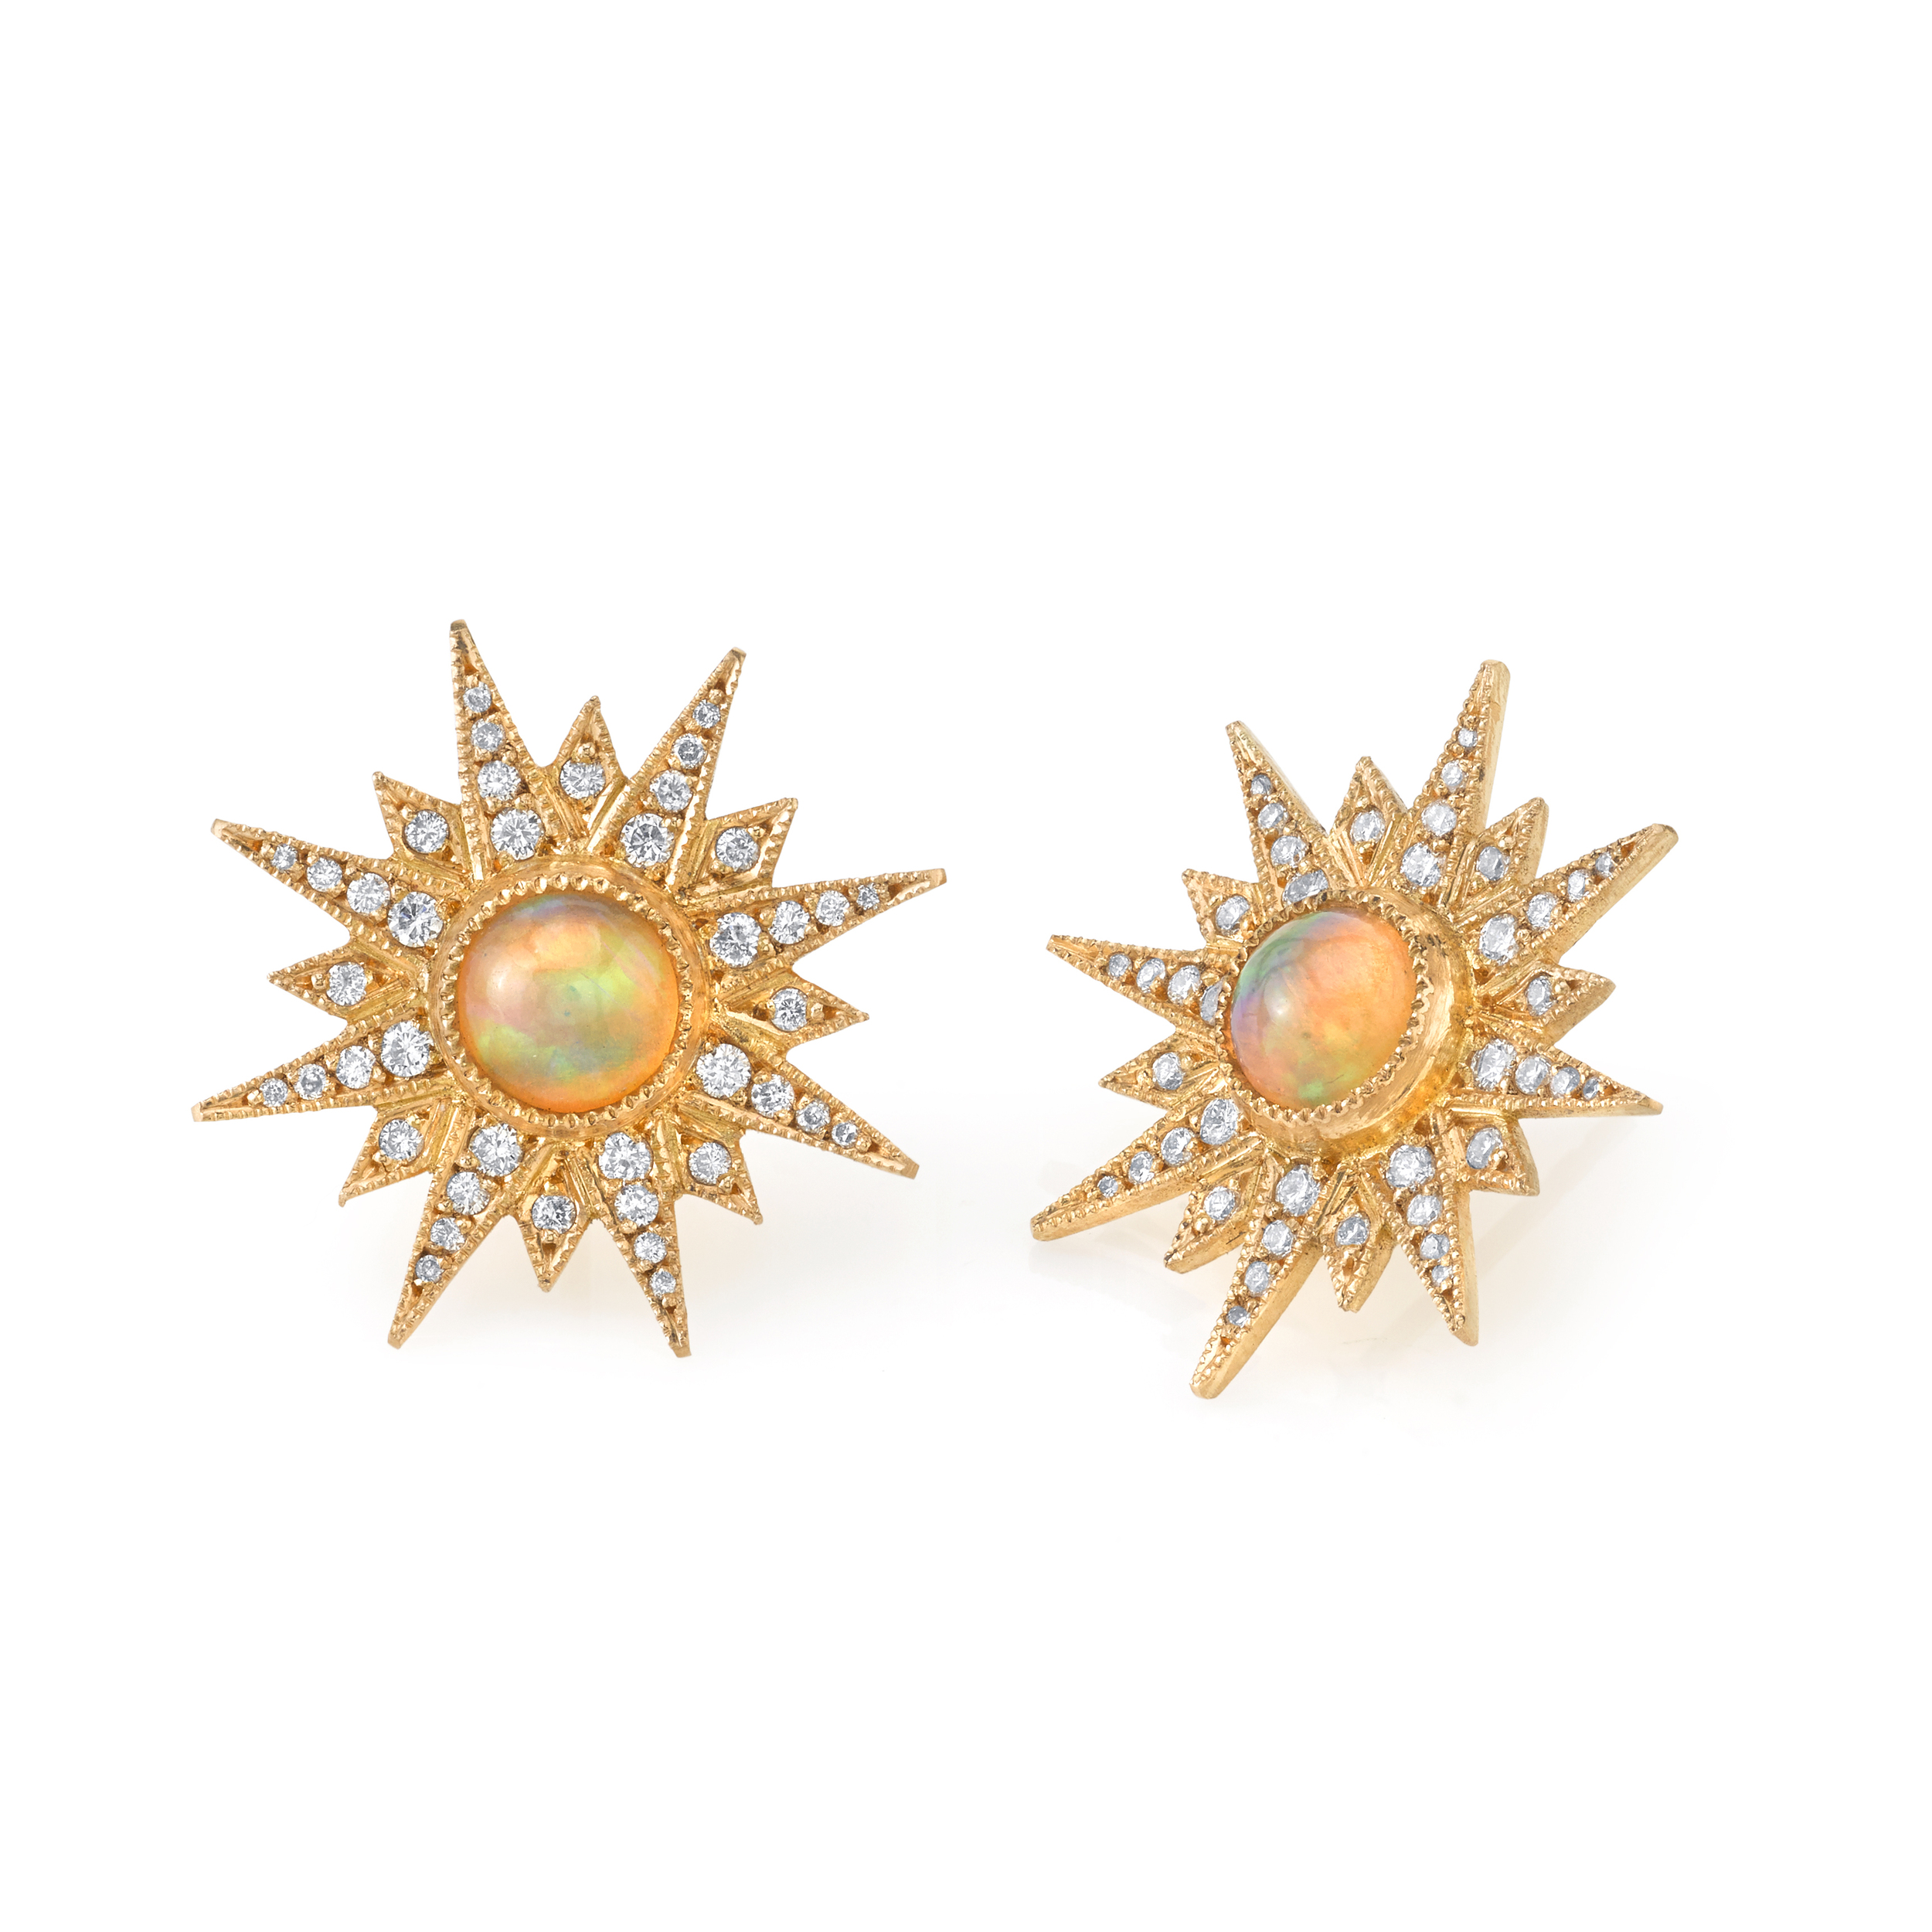  Starburst earrings with opal centers, $6,820.&nbsp; 